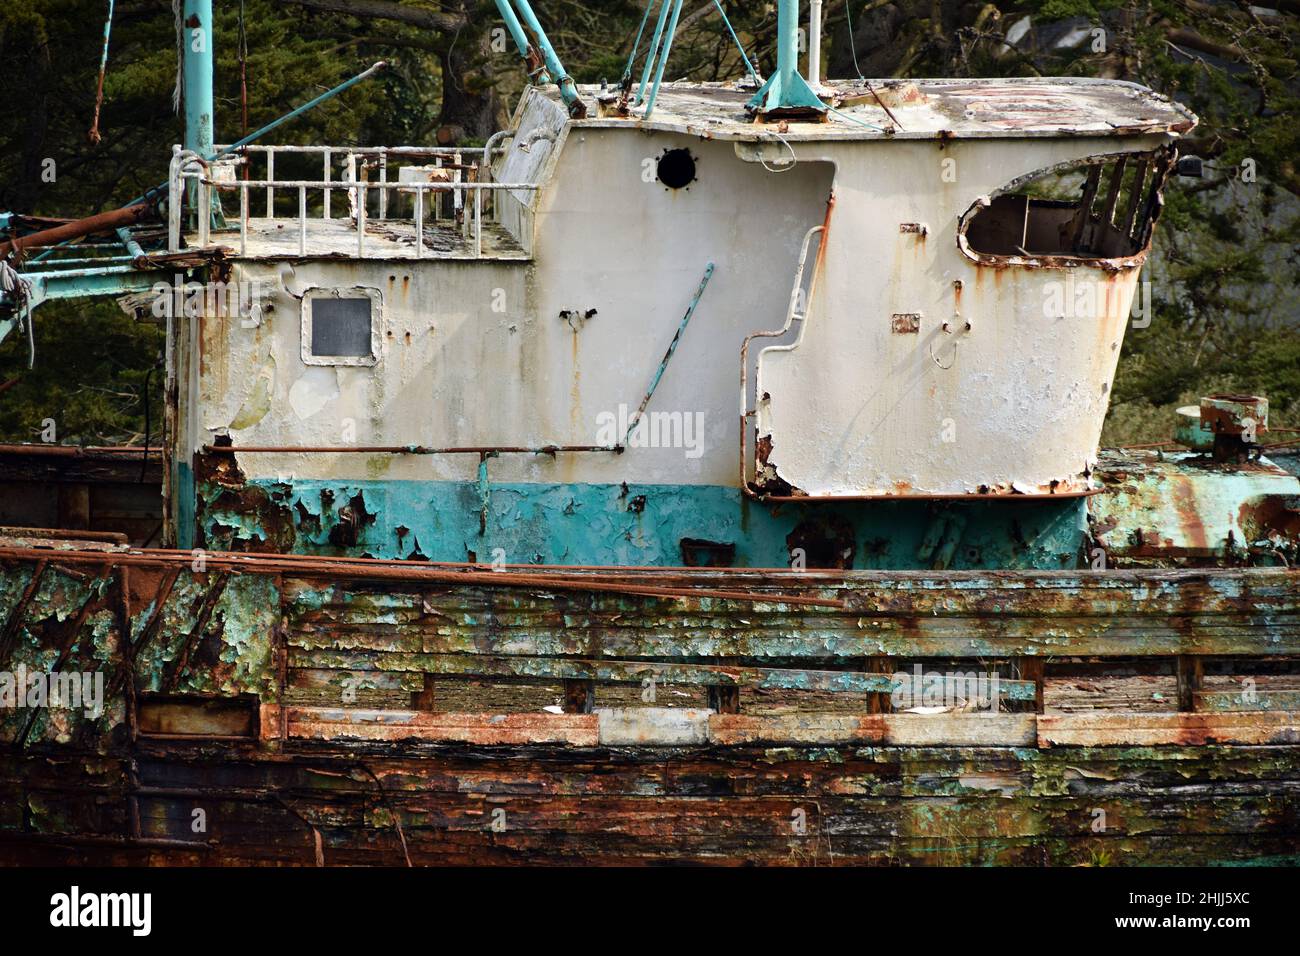 A wooden fishing boat wreck in the naval cemetery of Biden, Brittany. Stock Photo